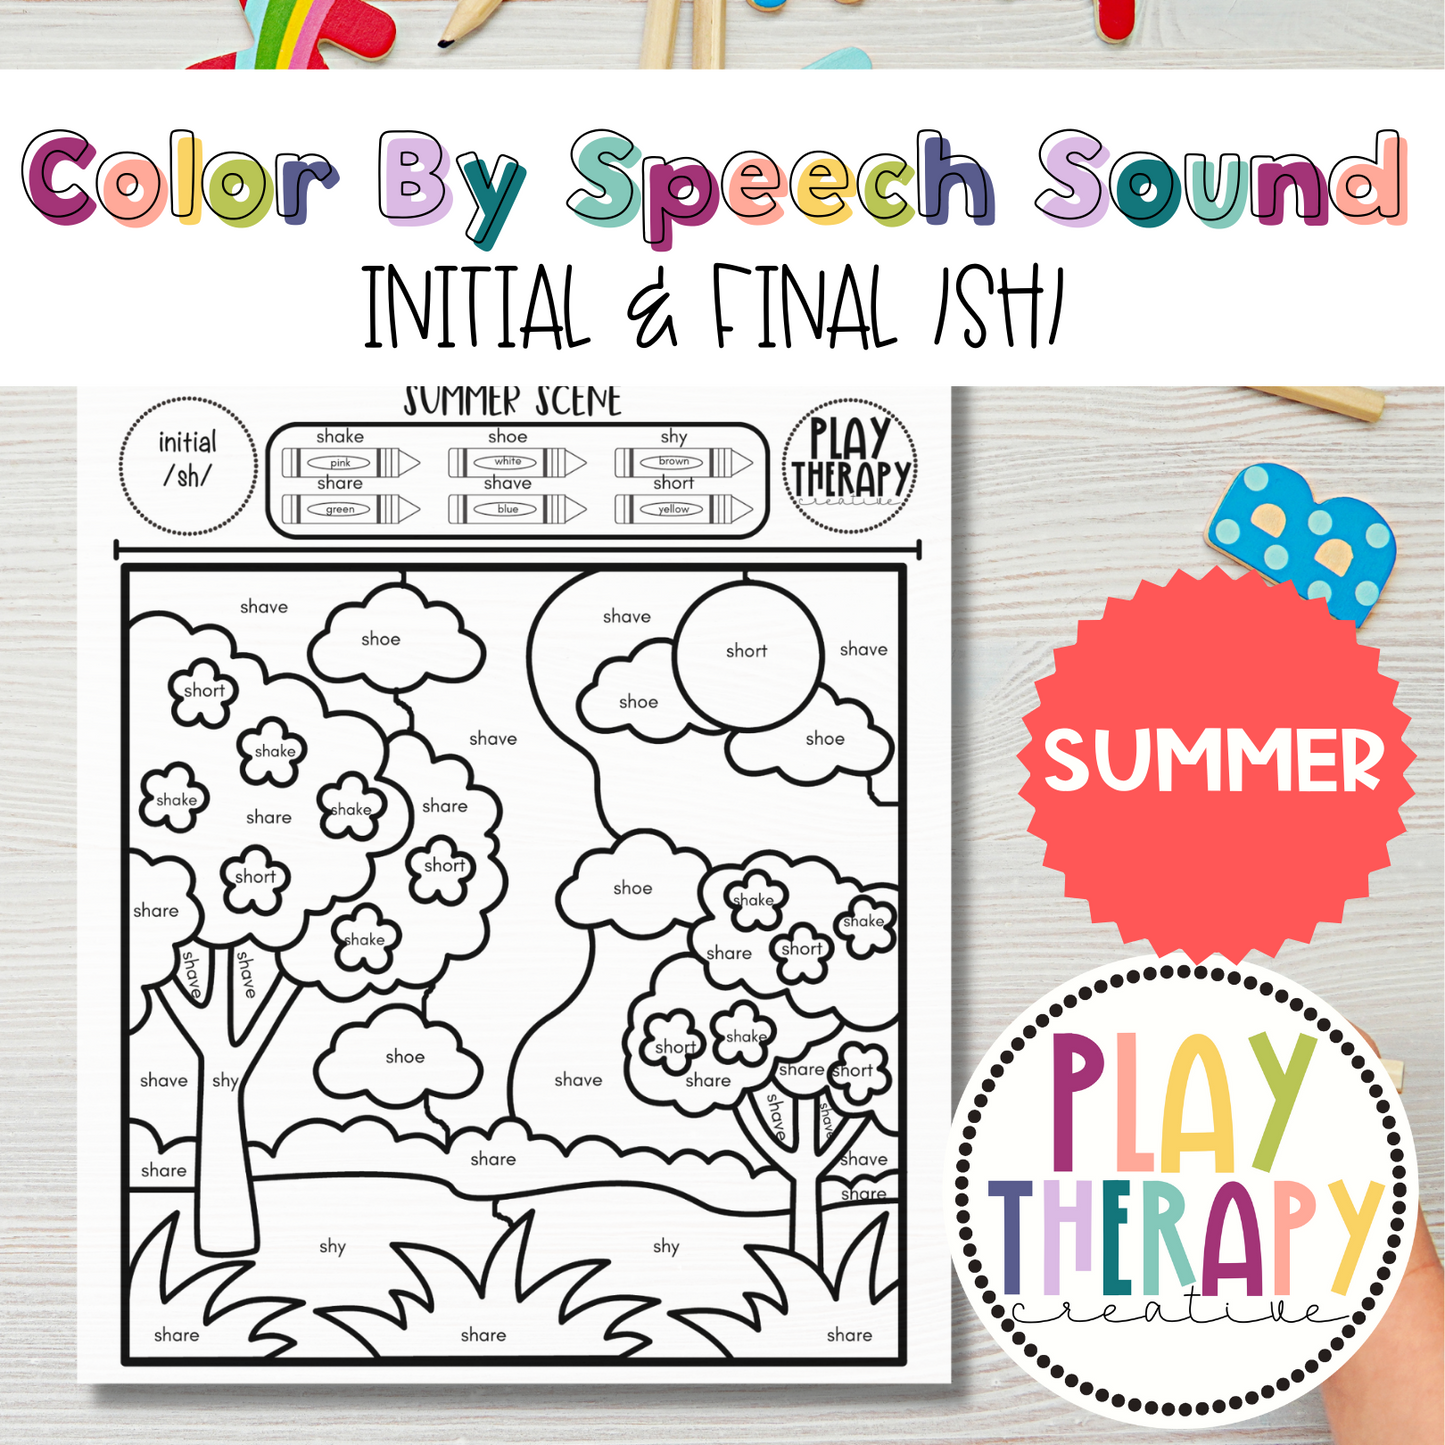 /sh/ Sound Summer Themed Color-by-Speech-Sounds for Speech Therapy